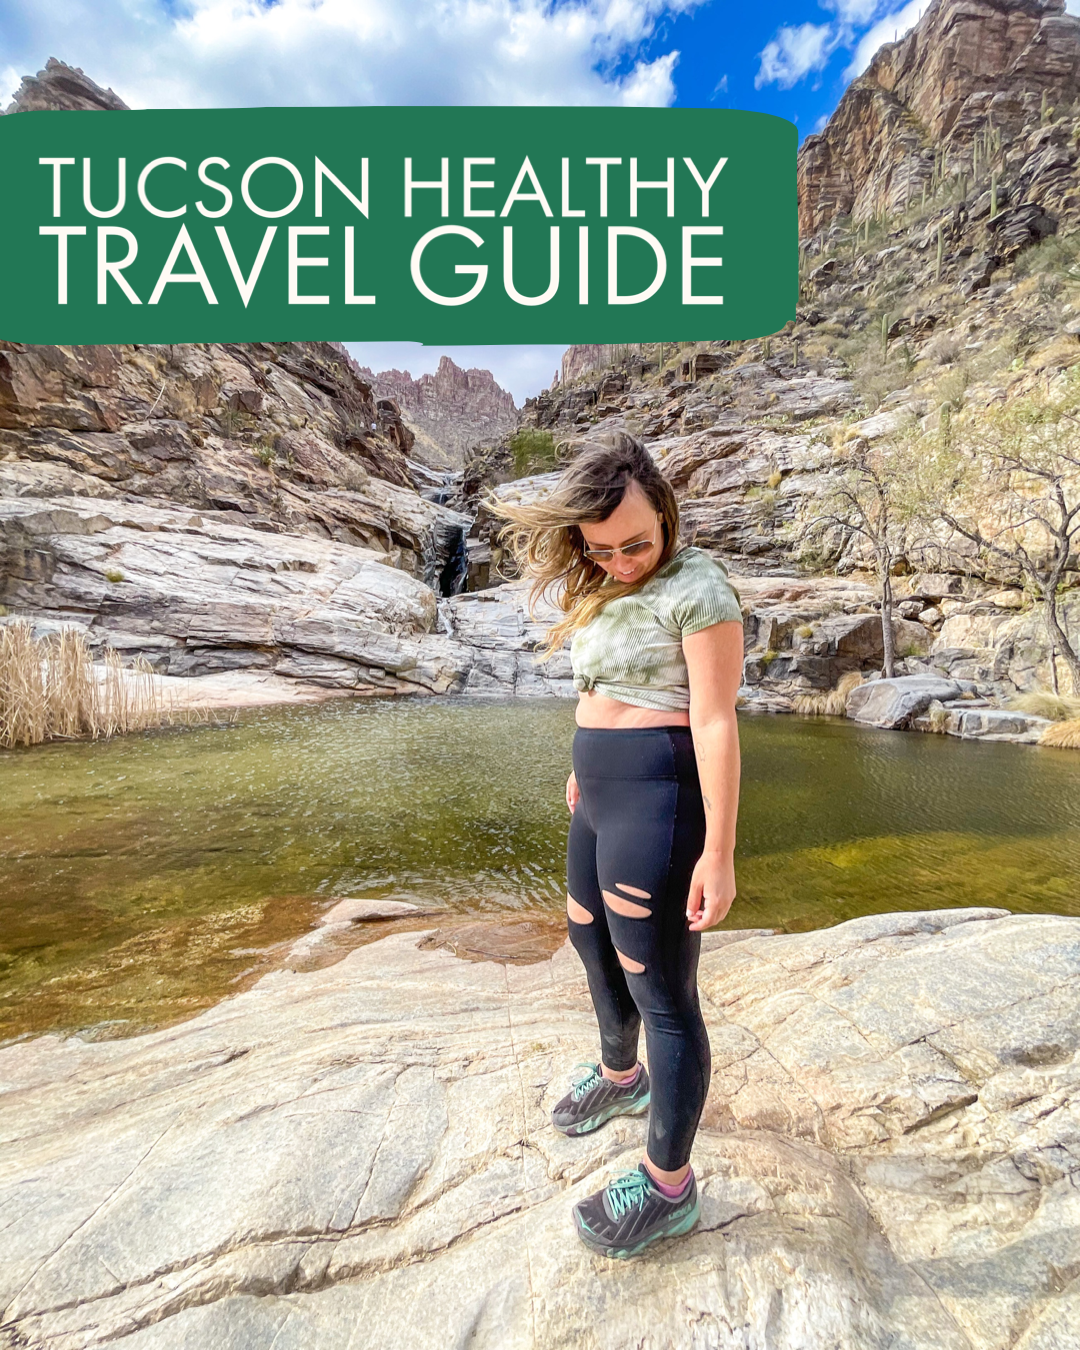 Liz Moody’s Tucson Travel Guide (Healthy Restaurants, Hikes, And More)